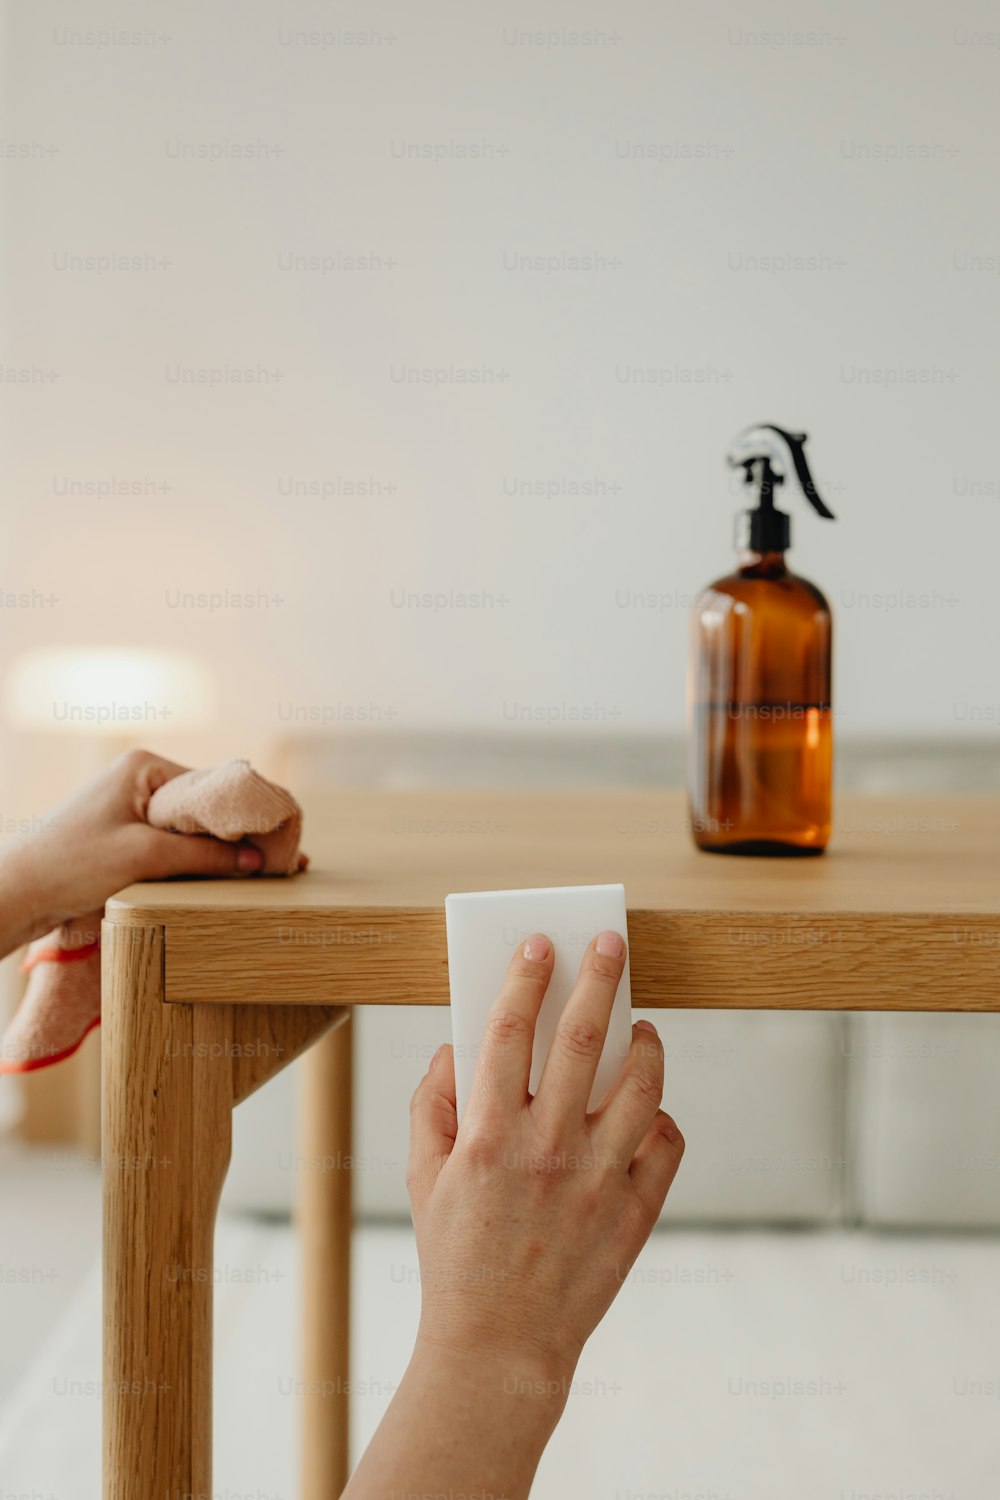 a person is sitting at a table with a soap dispenser